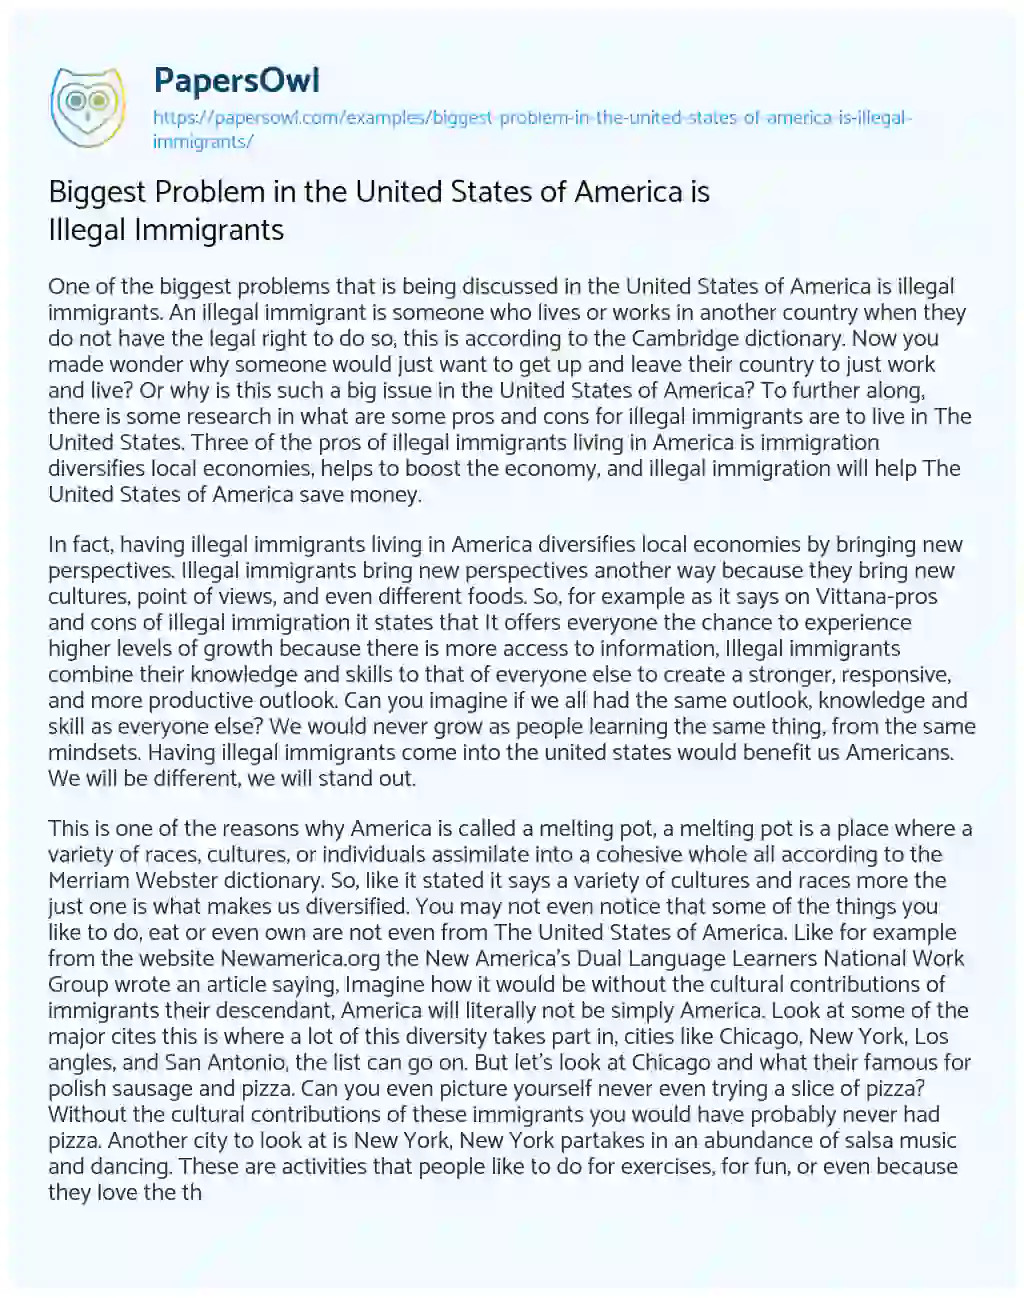 Biggest Problem in the United States of America is Illegal Immigrants essay